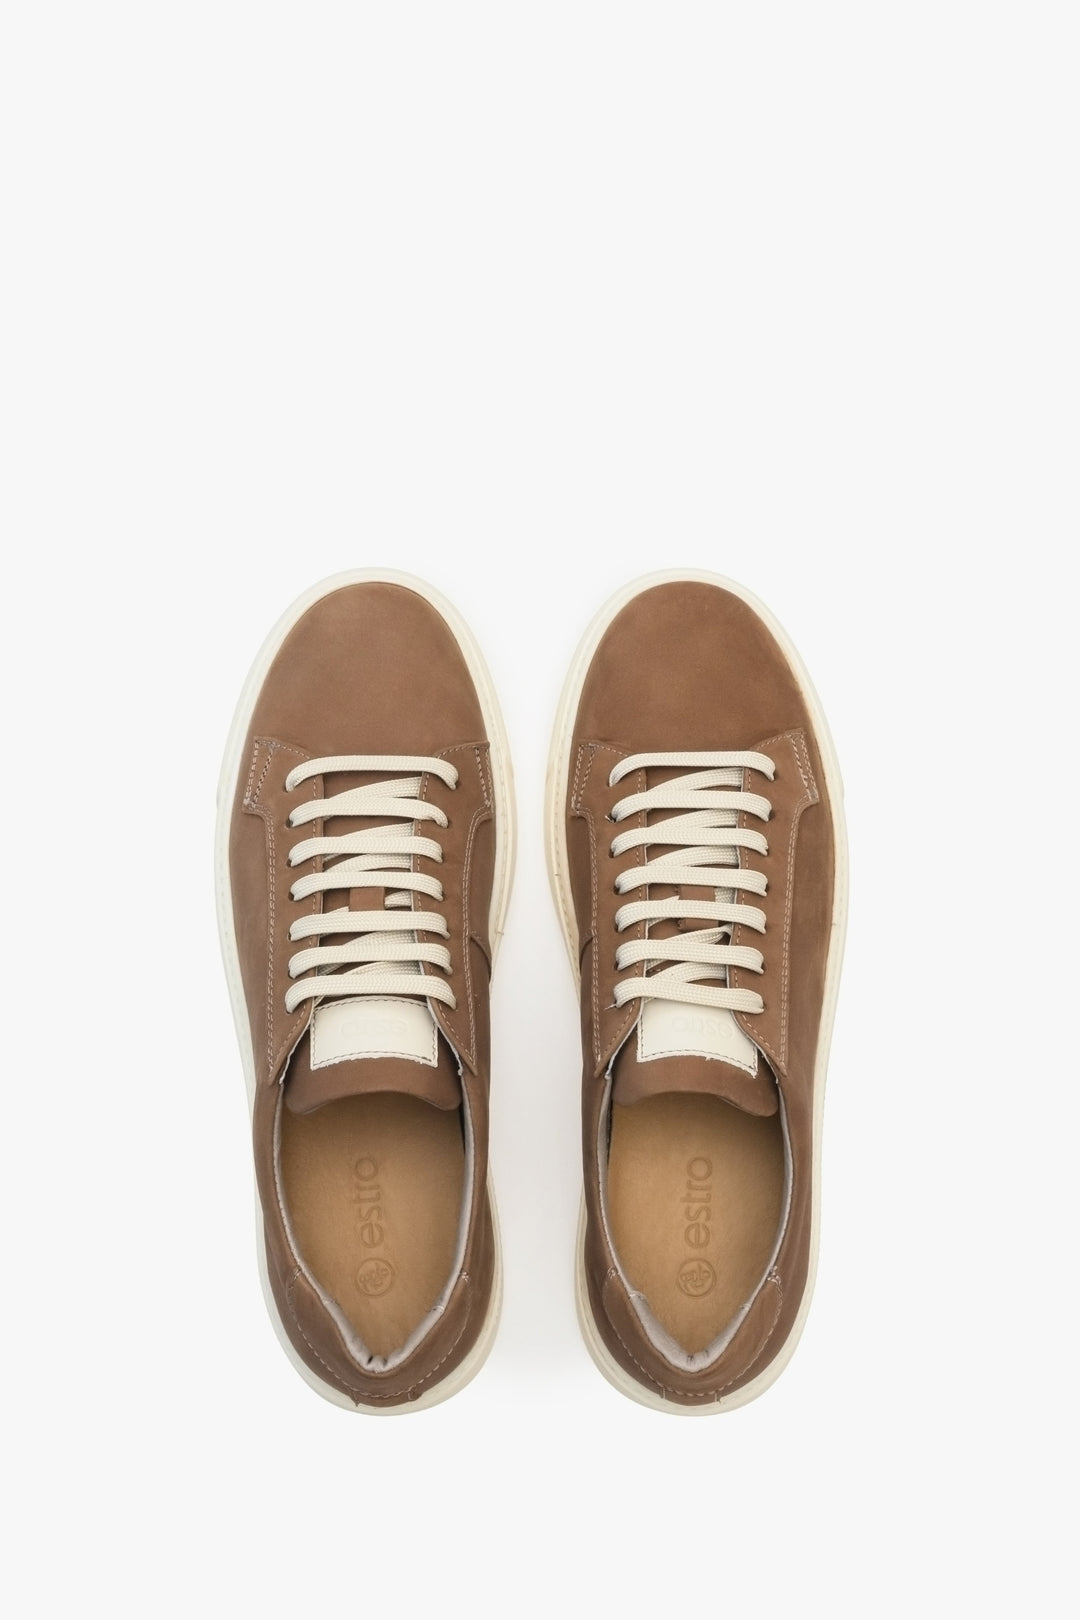 Men's Estro soft, natural nubuck sneakers in brown - shoe presentation from above.